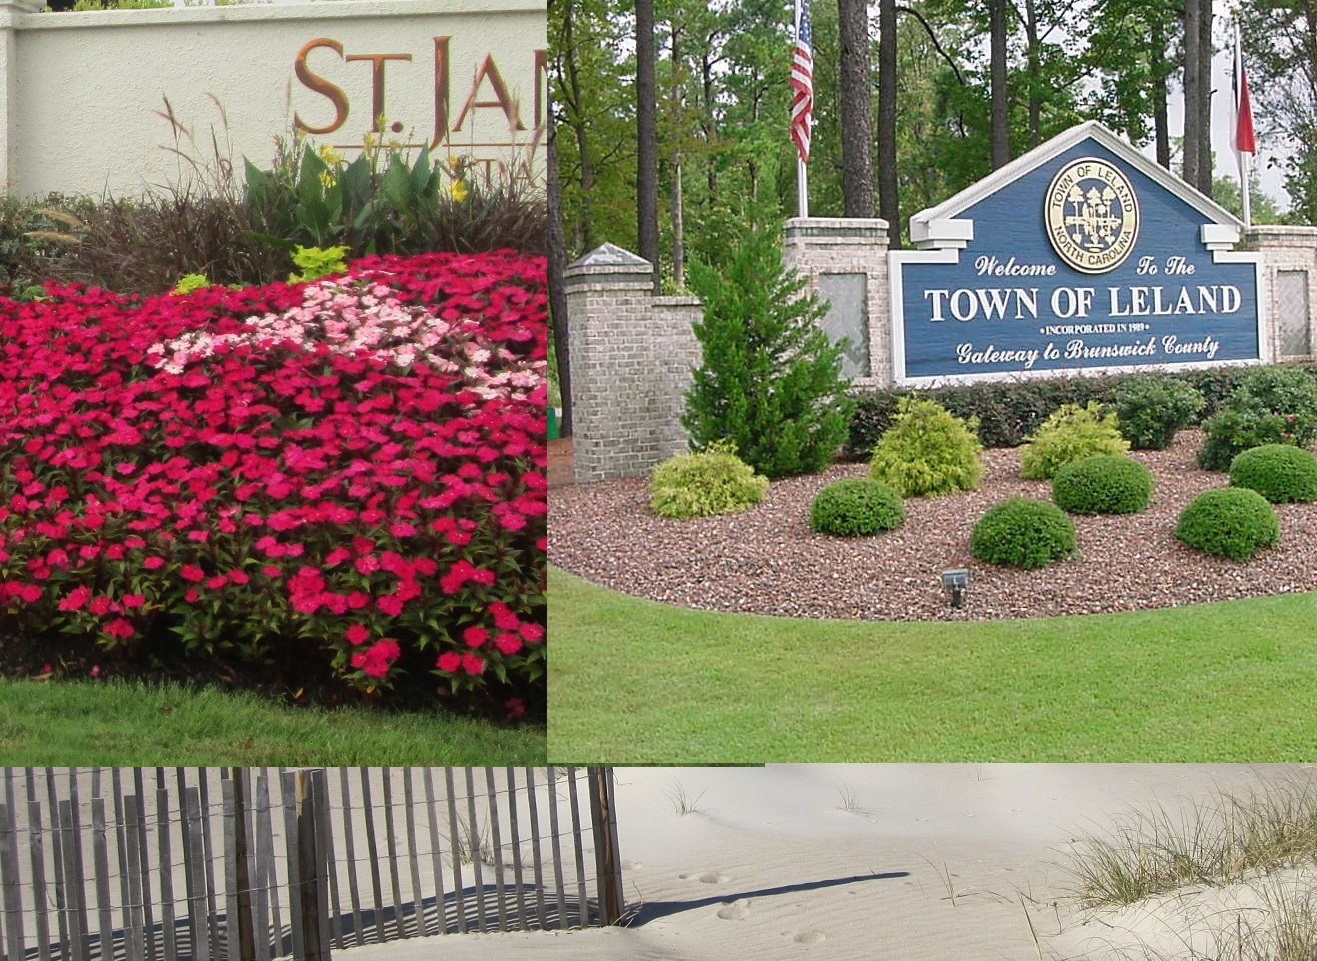 Southeastern NC communities and small towns